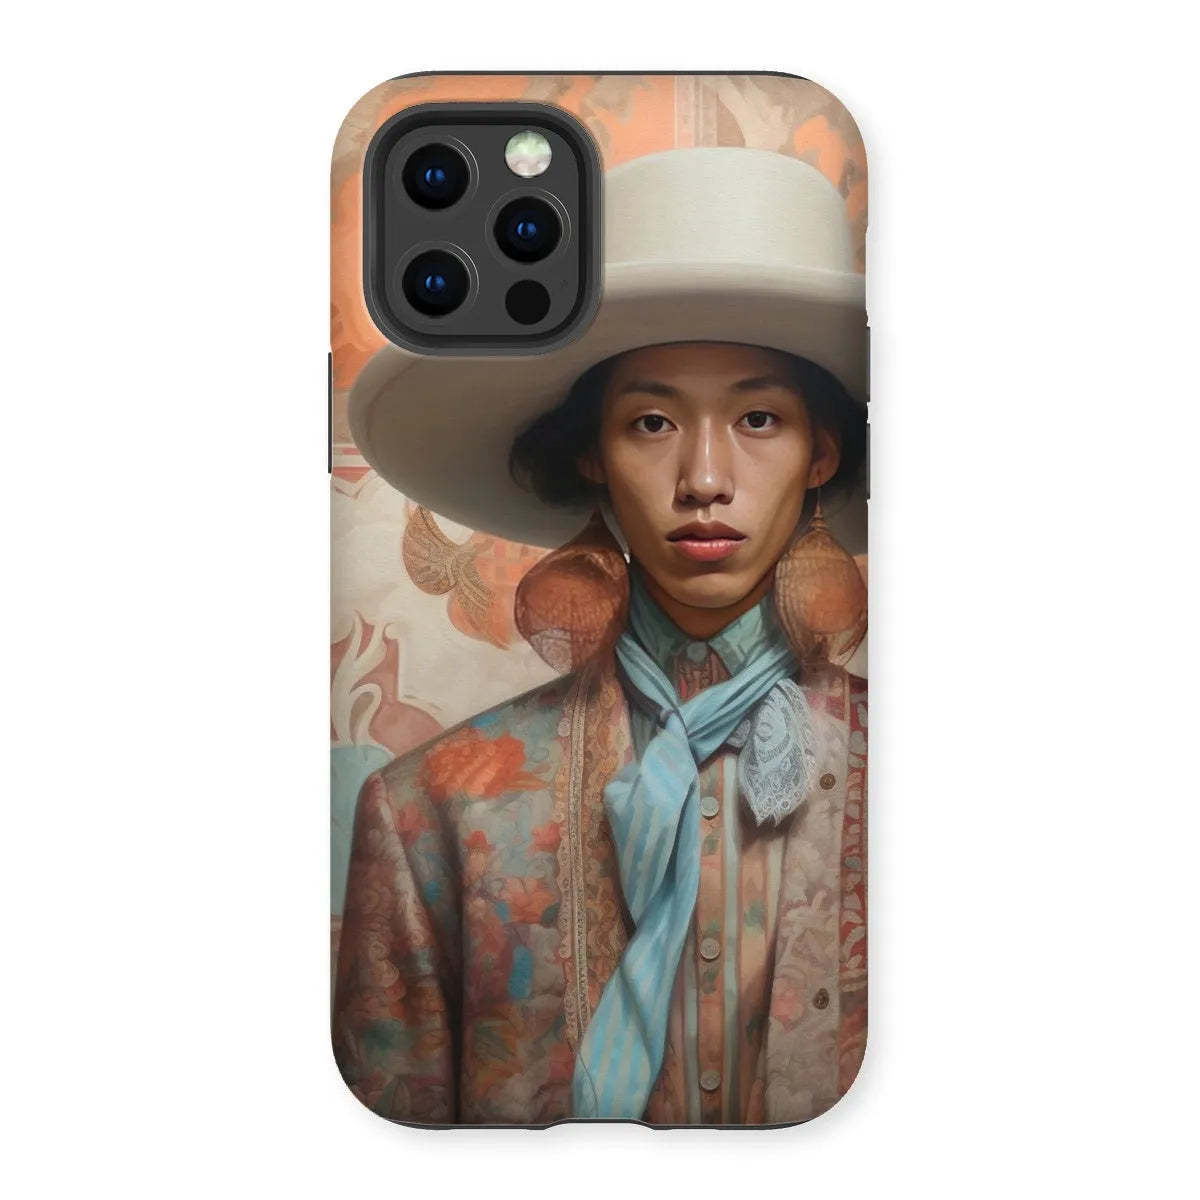 Iyaan - Gay Malay Asian Cowboy Aesthetic Art Phone Case - Iphone 12 Pro / Matte - Mobile Phone Cases - Aesthetic Art